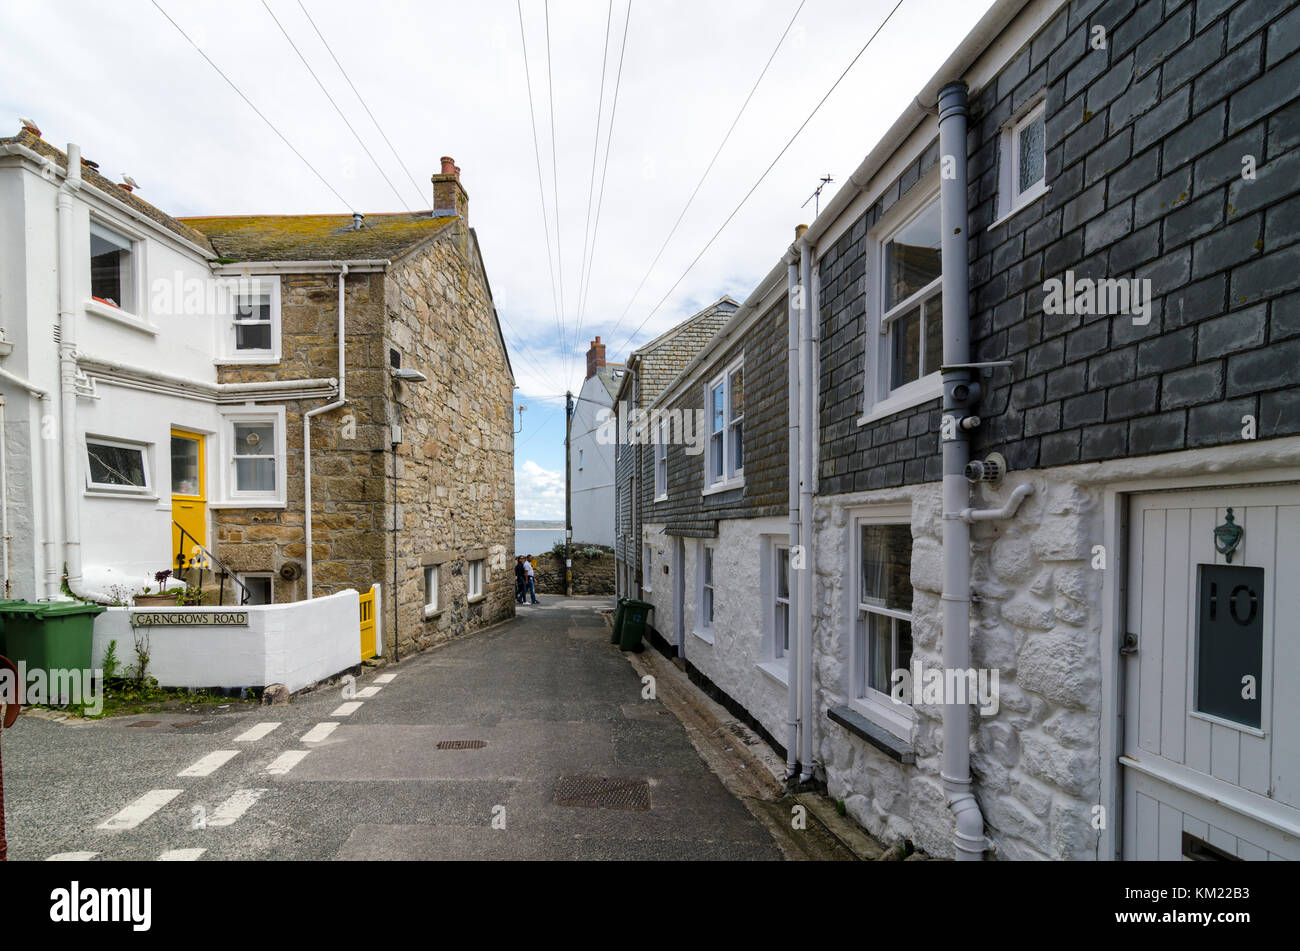 Cottages and row of terraced or terrace houses on narrow backstreets in St Ives, Cornwall, UK Stock Photo